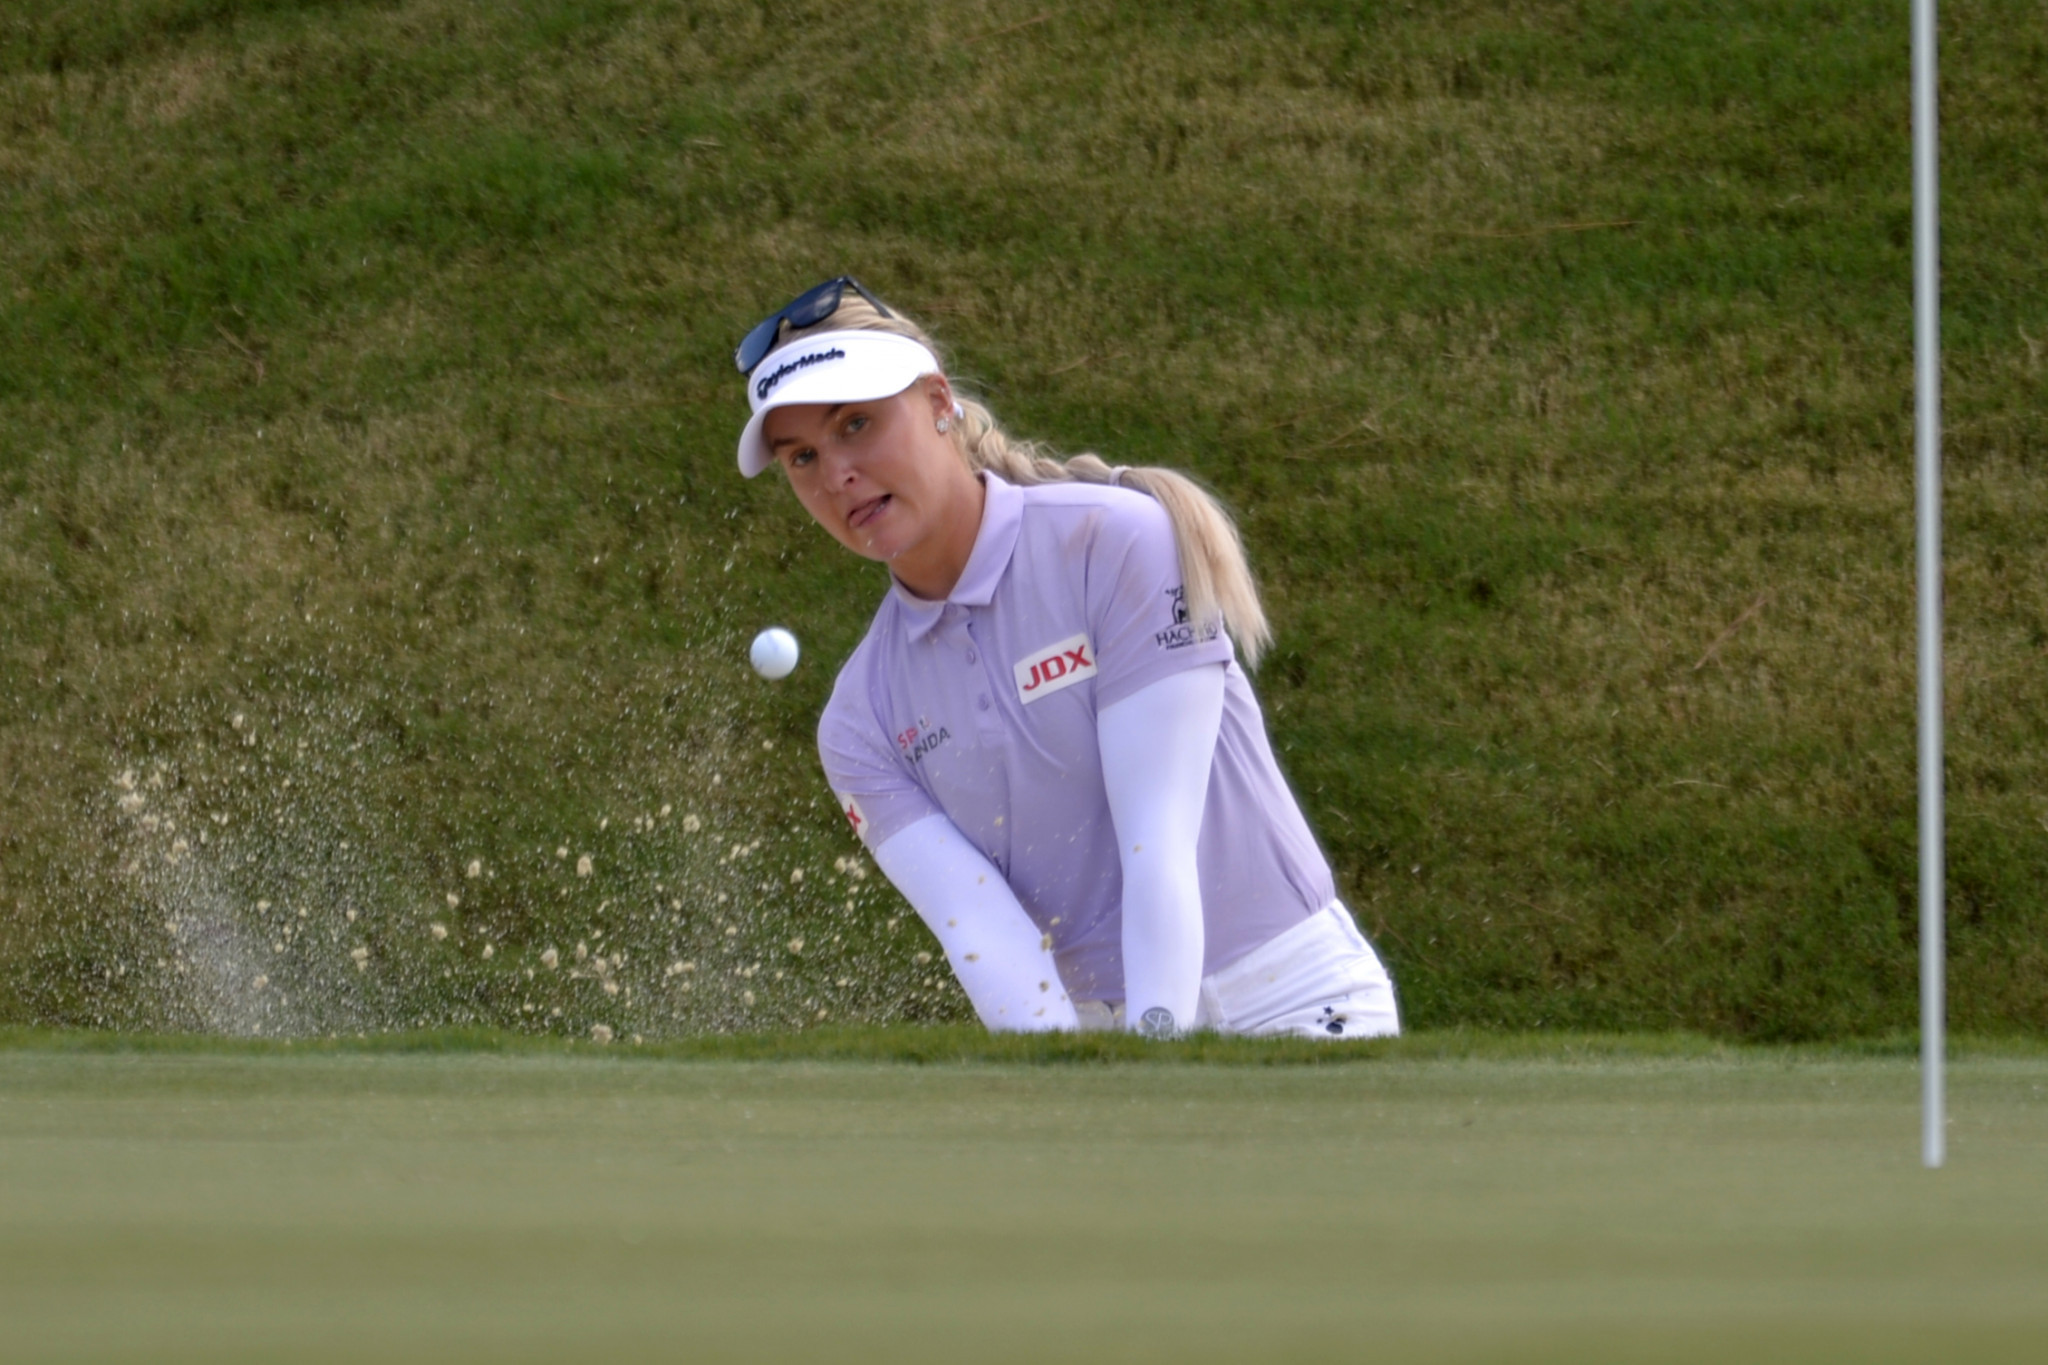 England's Charley Hull is one shot off the lead in second ©Getty Images